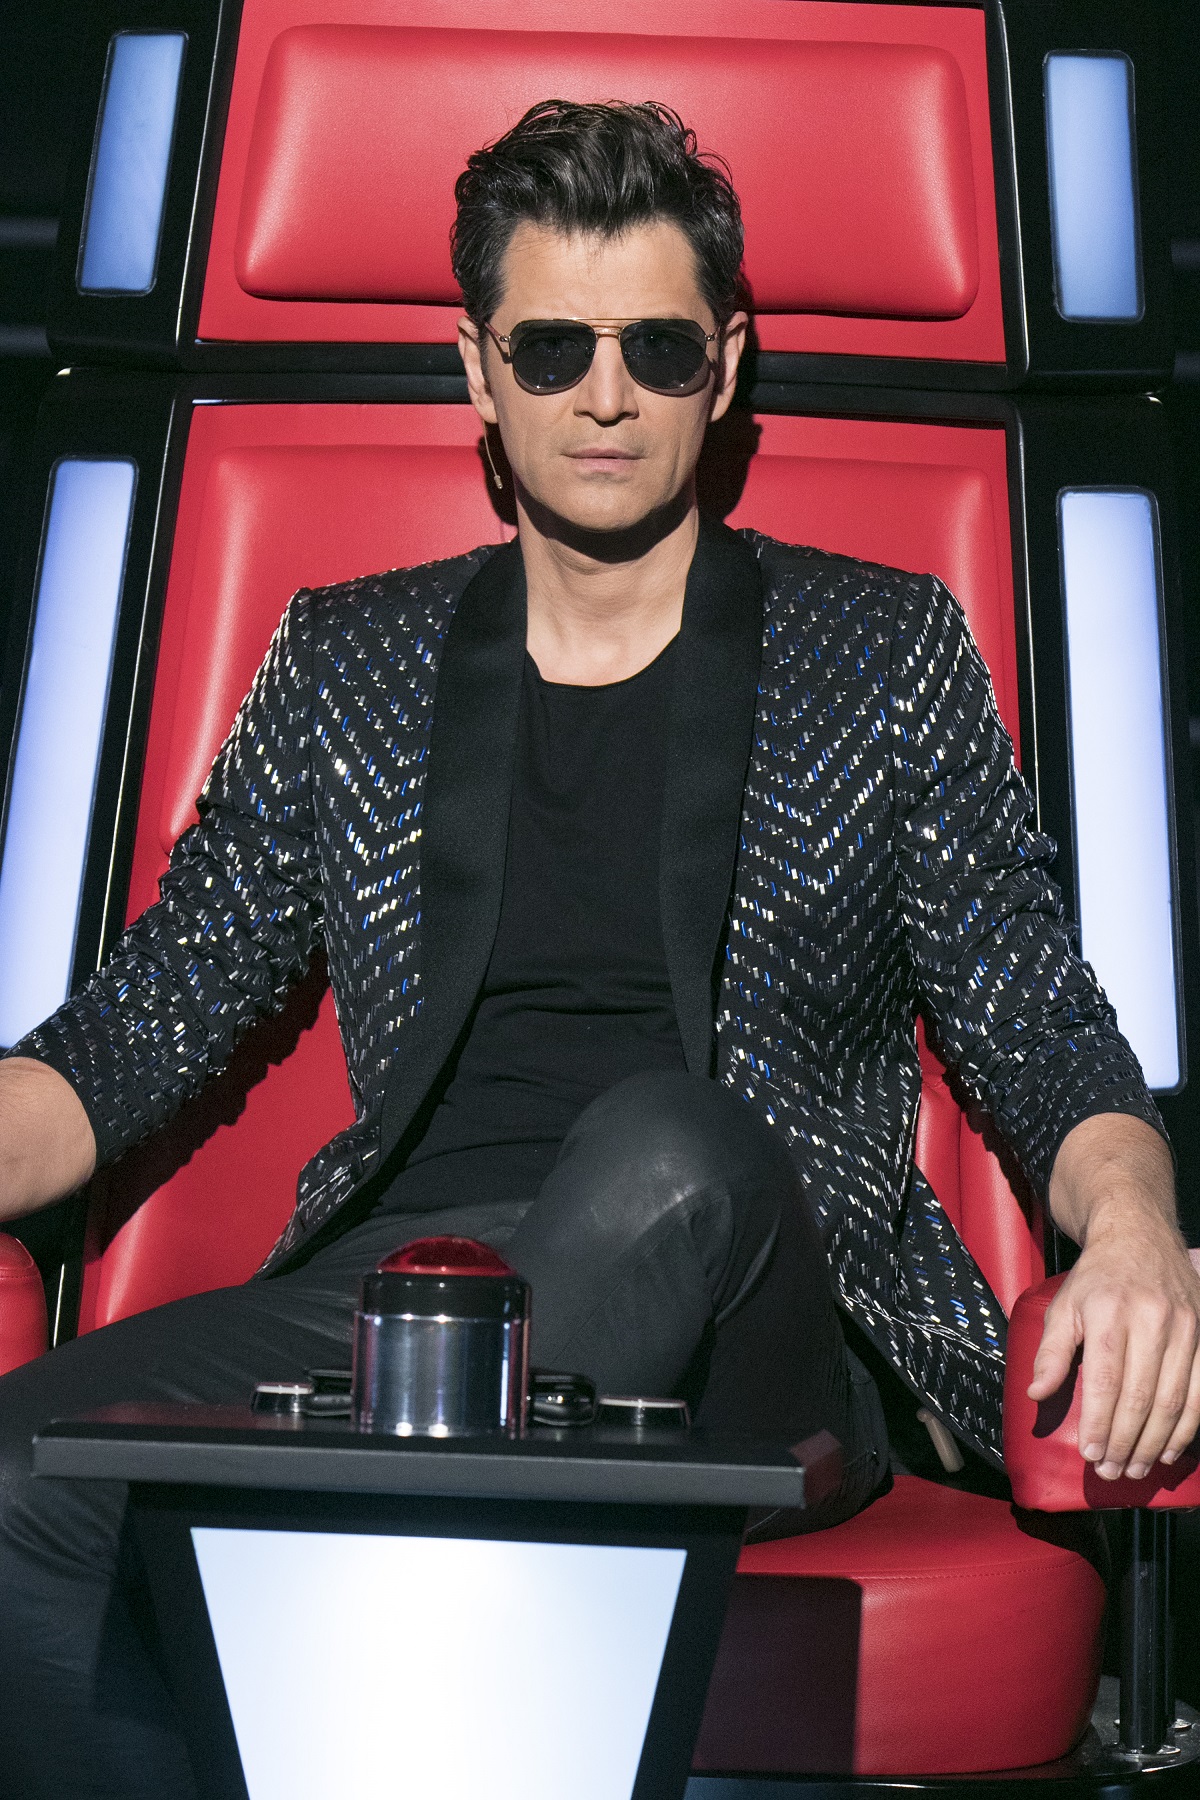 The Voice of Greece: Συνεχίζονται τα Knockouts με… steal!